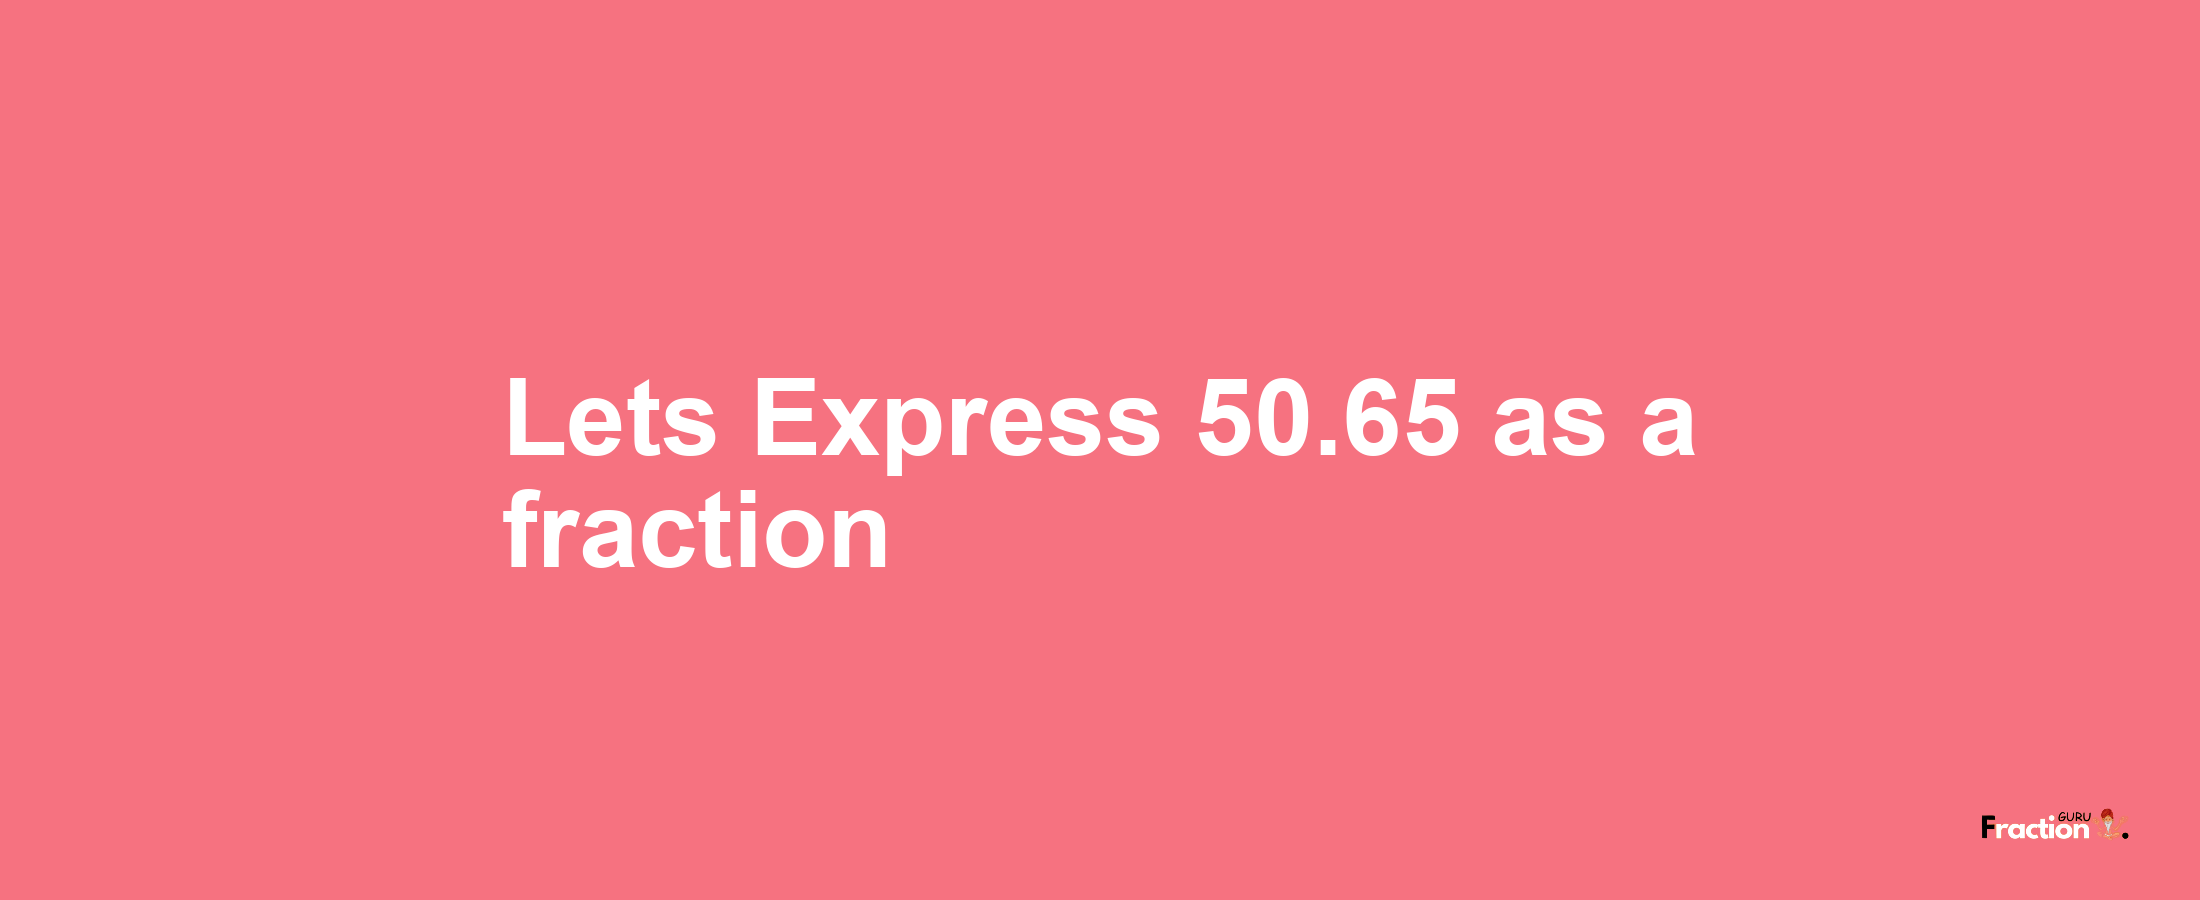 Lets Express 50.65 as afraction